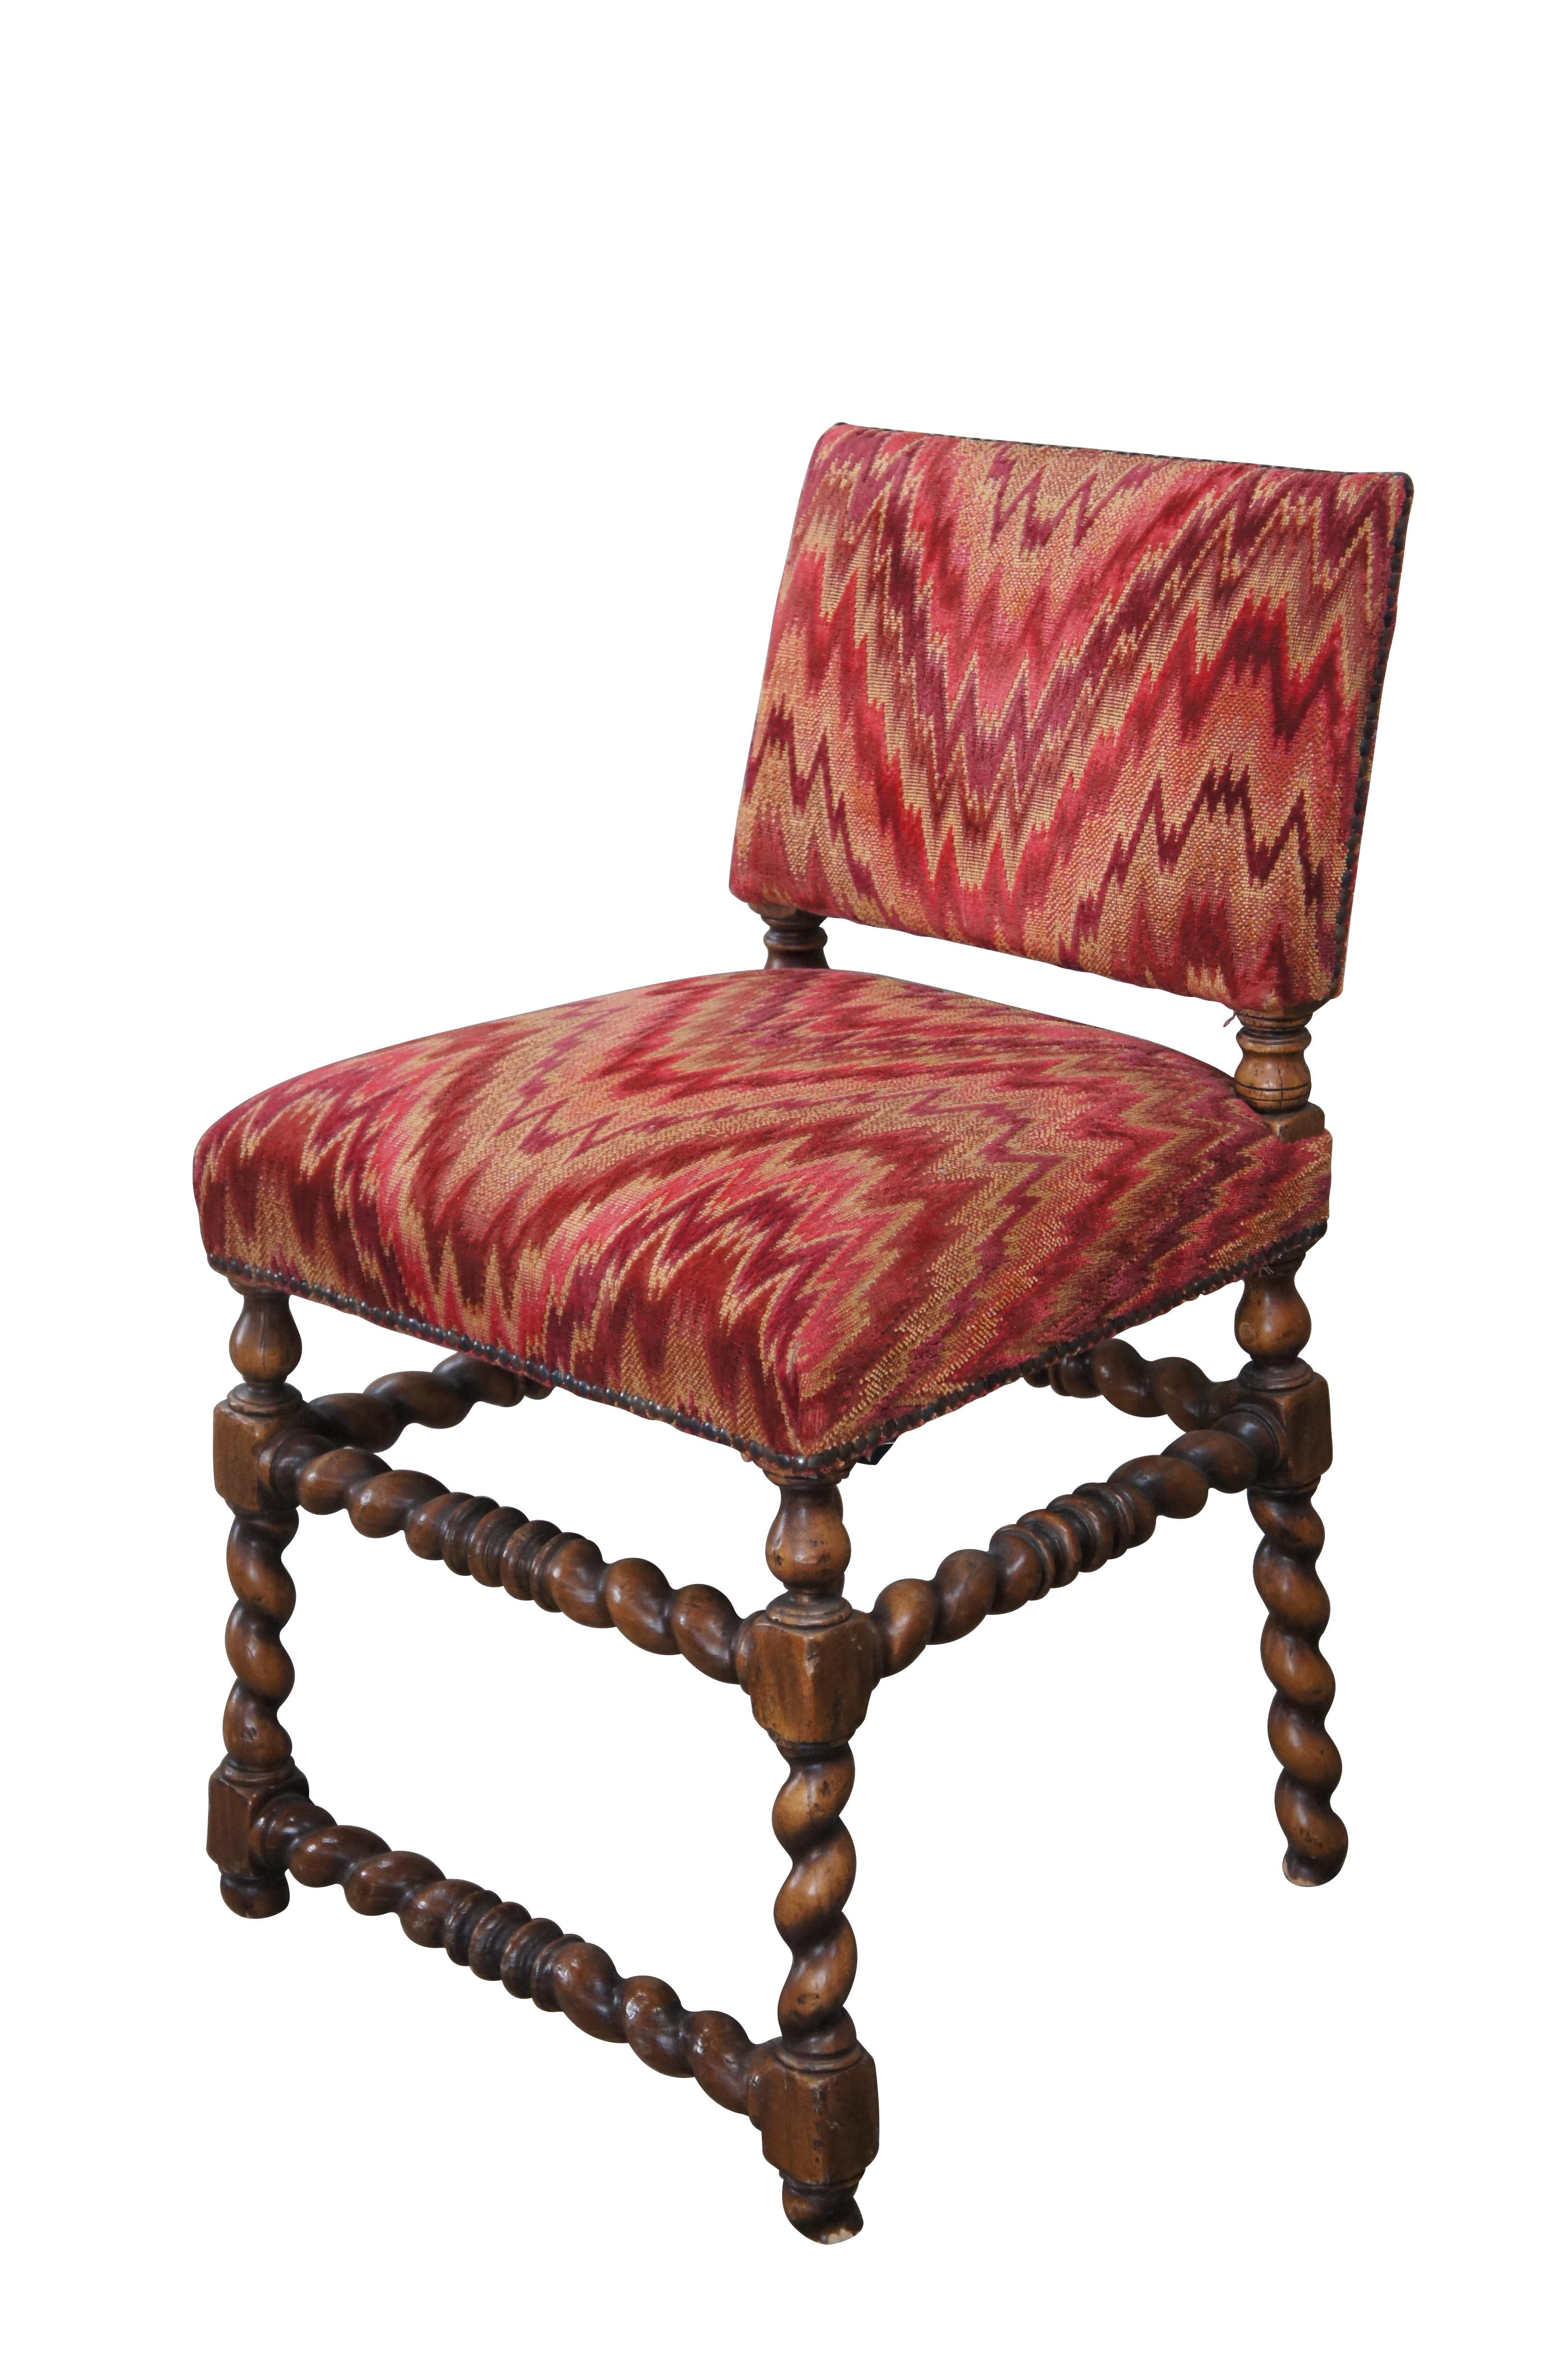 Vintage Spanish oak barley twisted vanity chair featuring a neat red Southwestern upholstery with nailhead trim.

Dimensions:
21